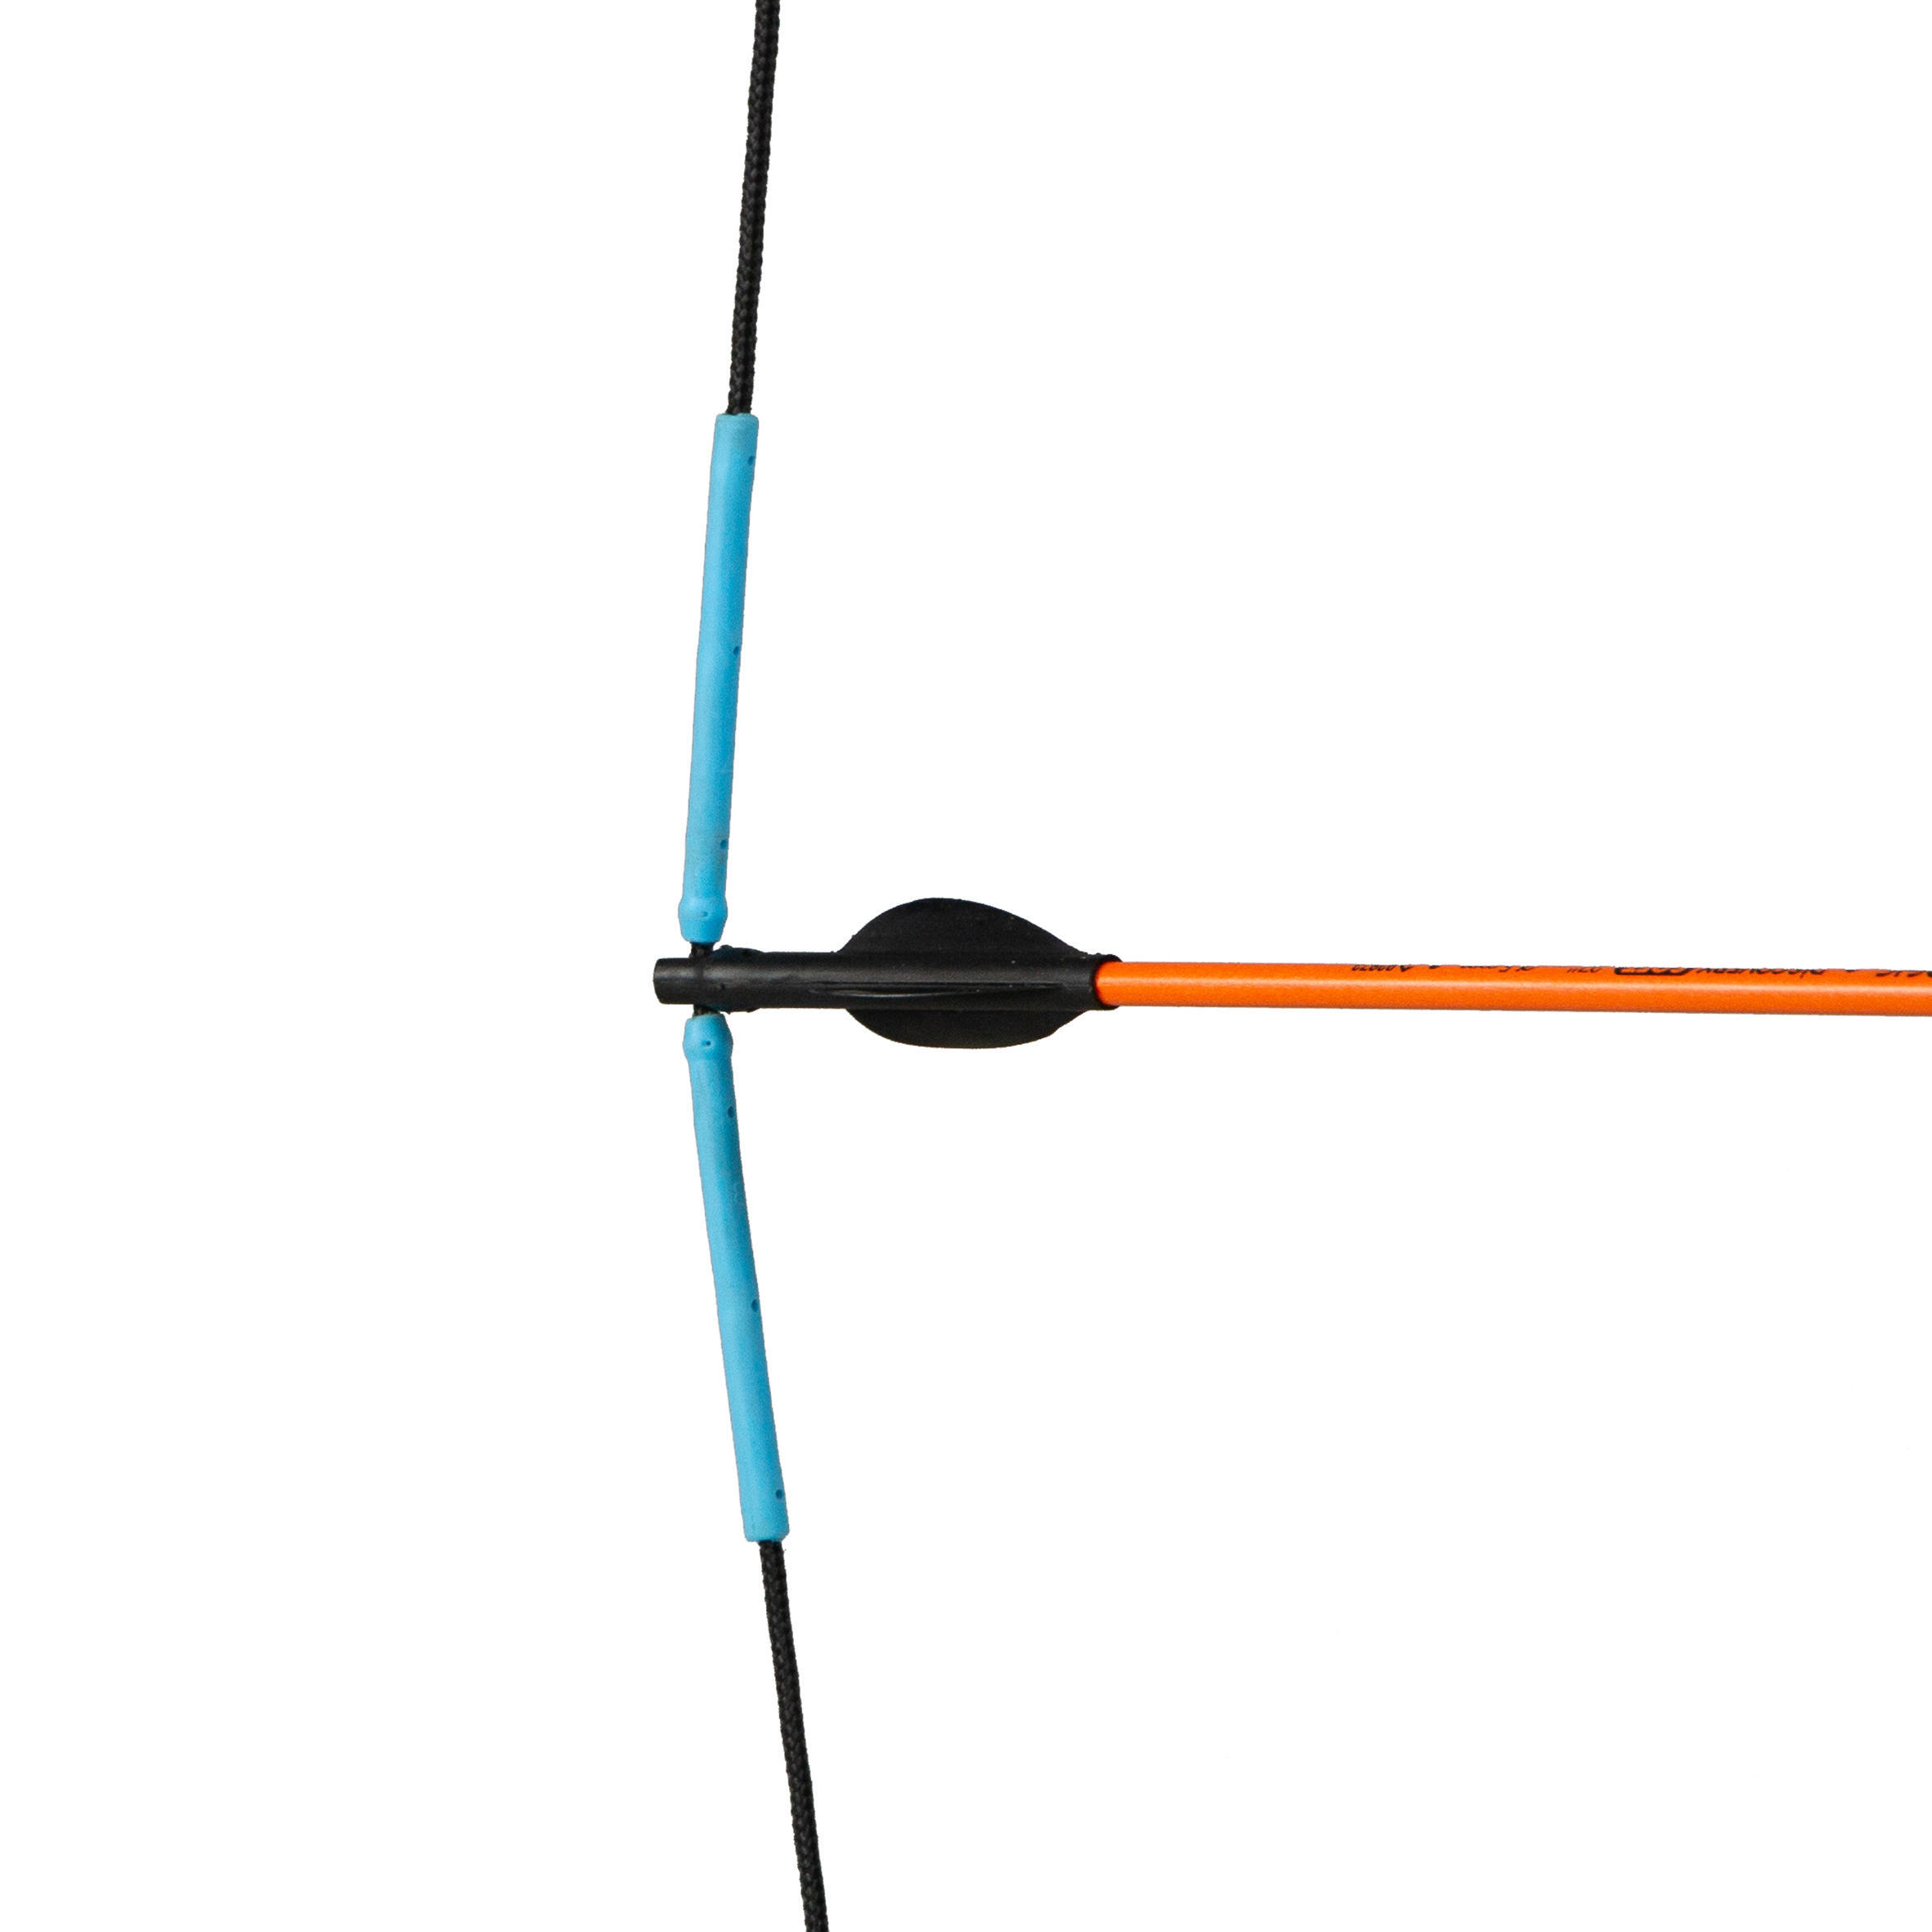 Kids' Archery Bow Discovery Junior - Blue 4/10